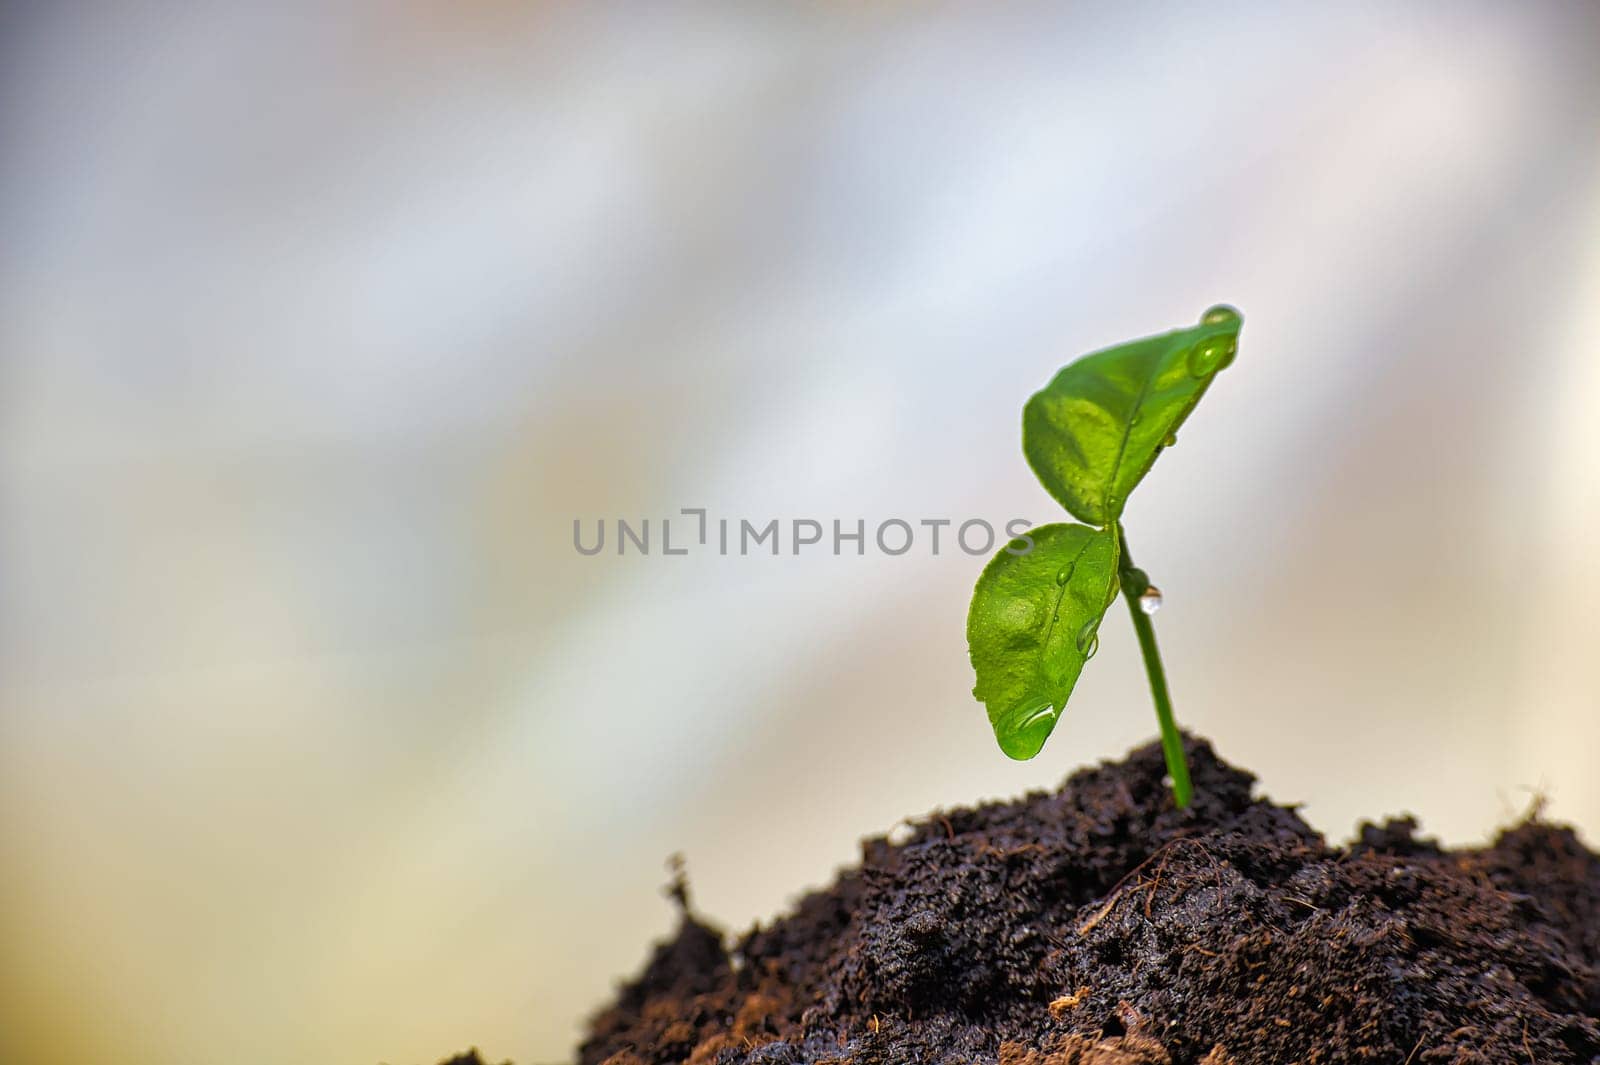 Small green seedling with vibrant green leaves growing from the rich, moist soil, droplet of water on the tips of the leaves, capturing the essence of freshness